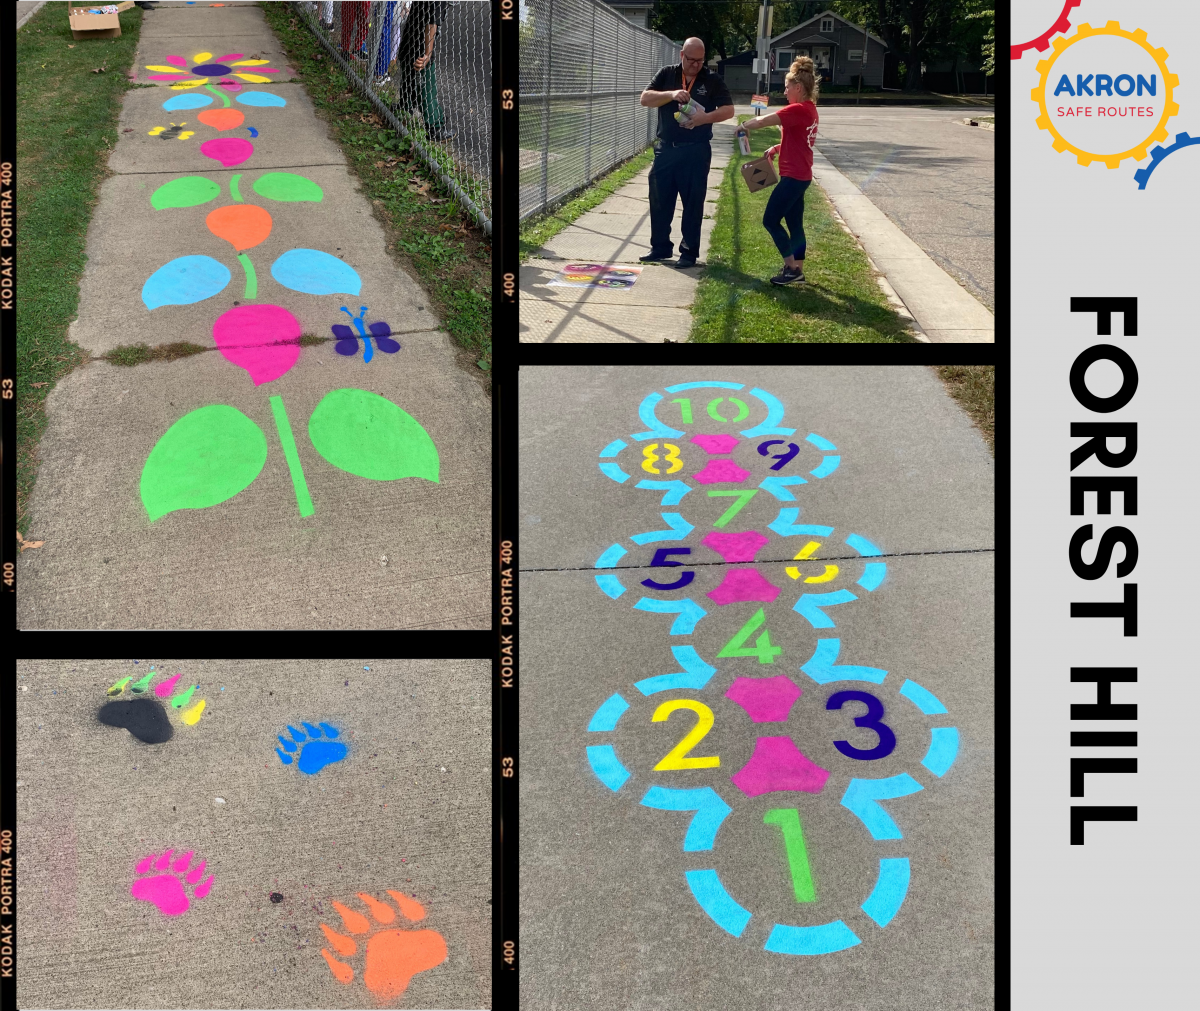 Image of painted activity stations, yoga poses, hopscotch, and wayfinding animal prints on the sidewalks